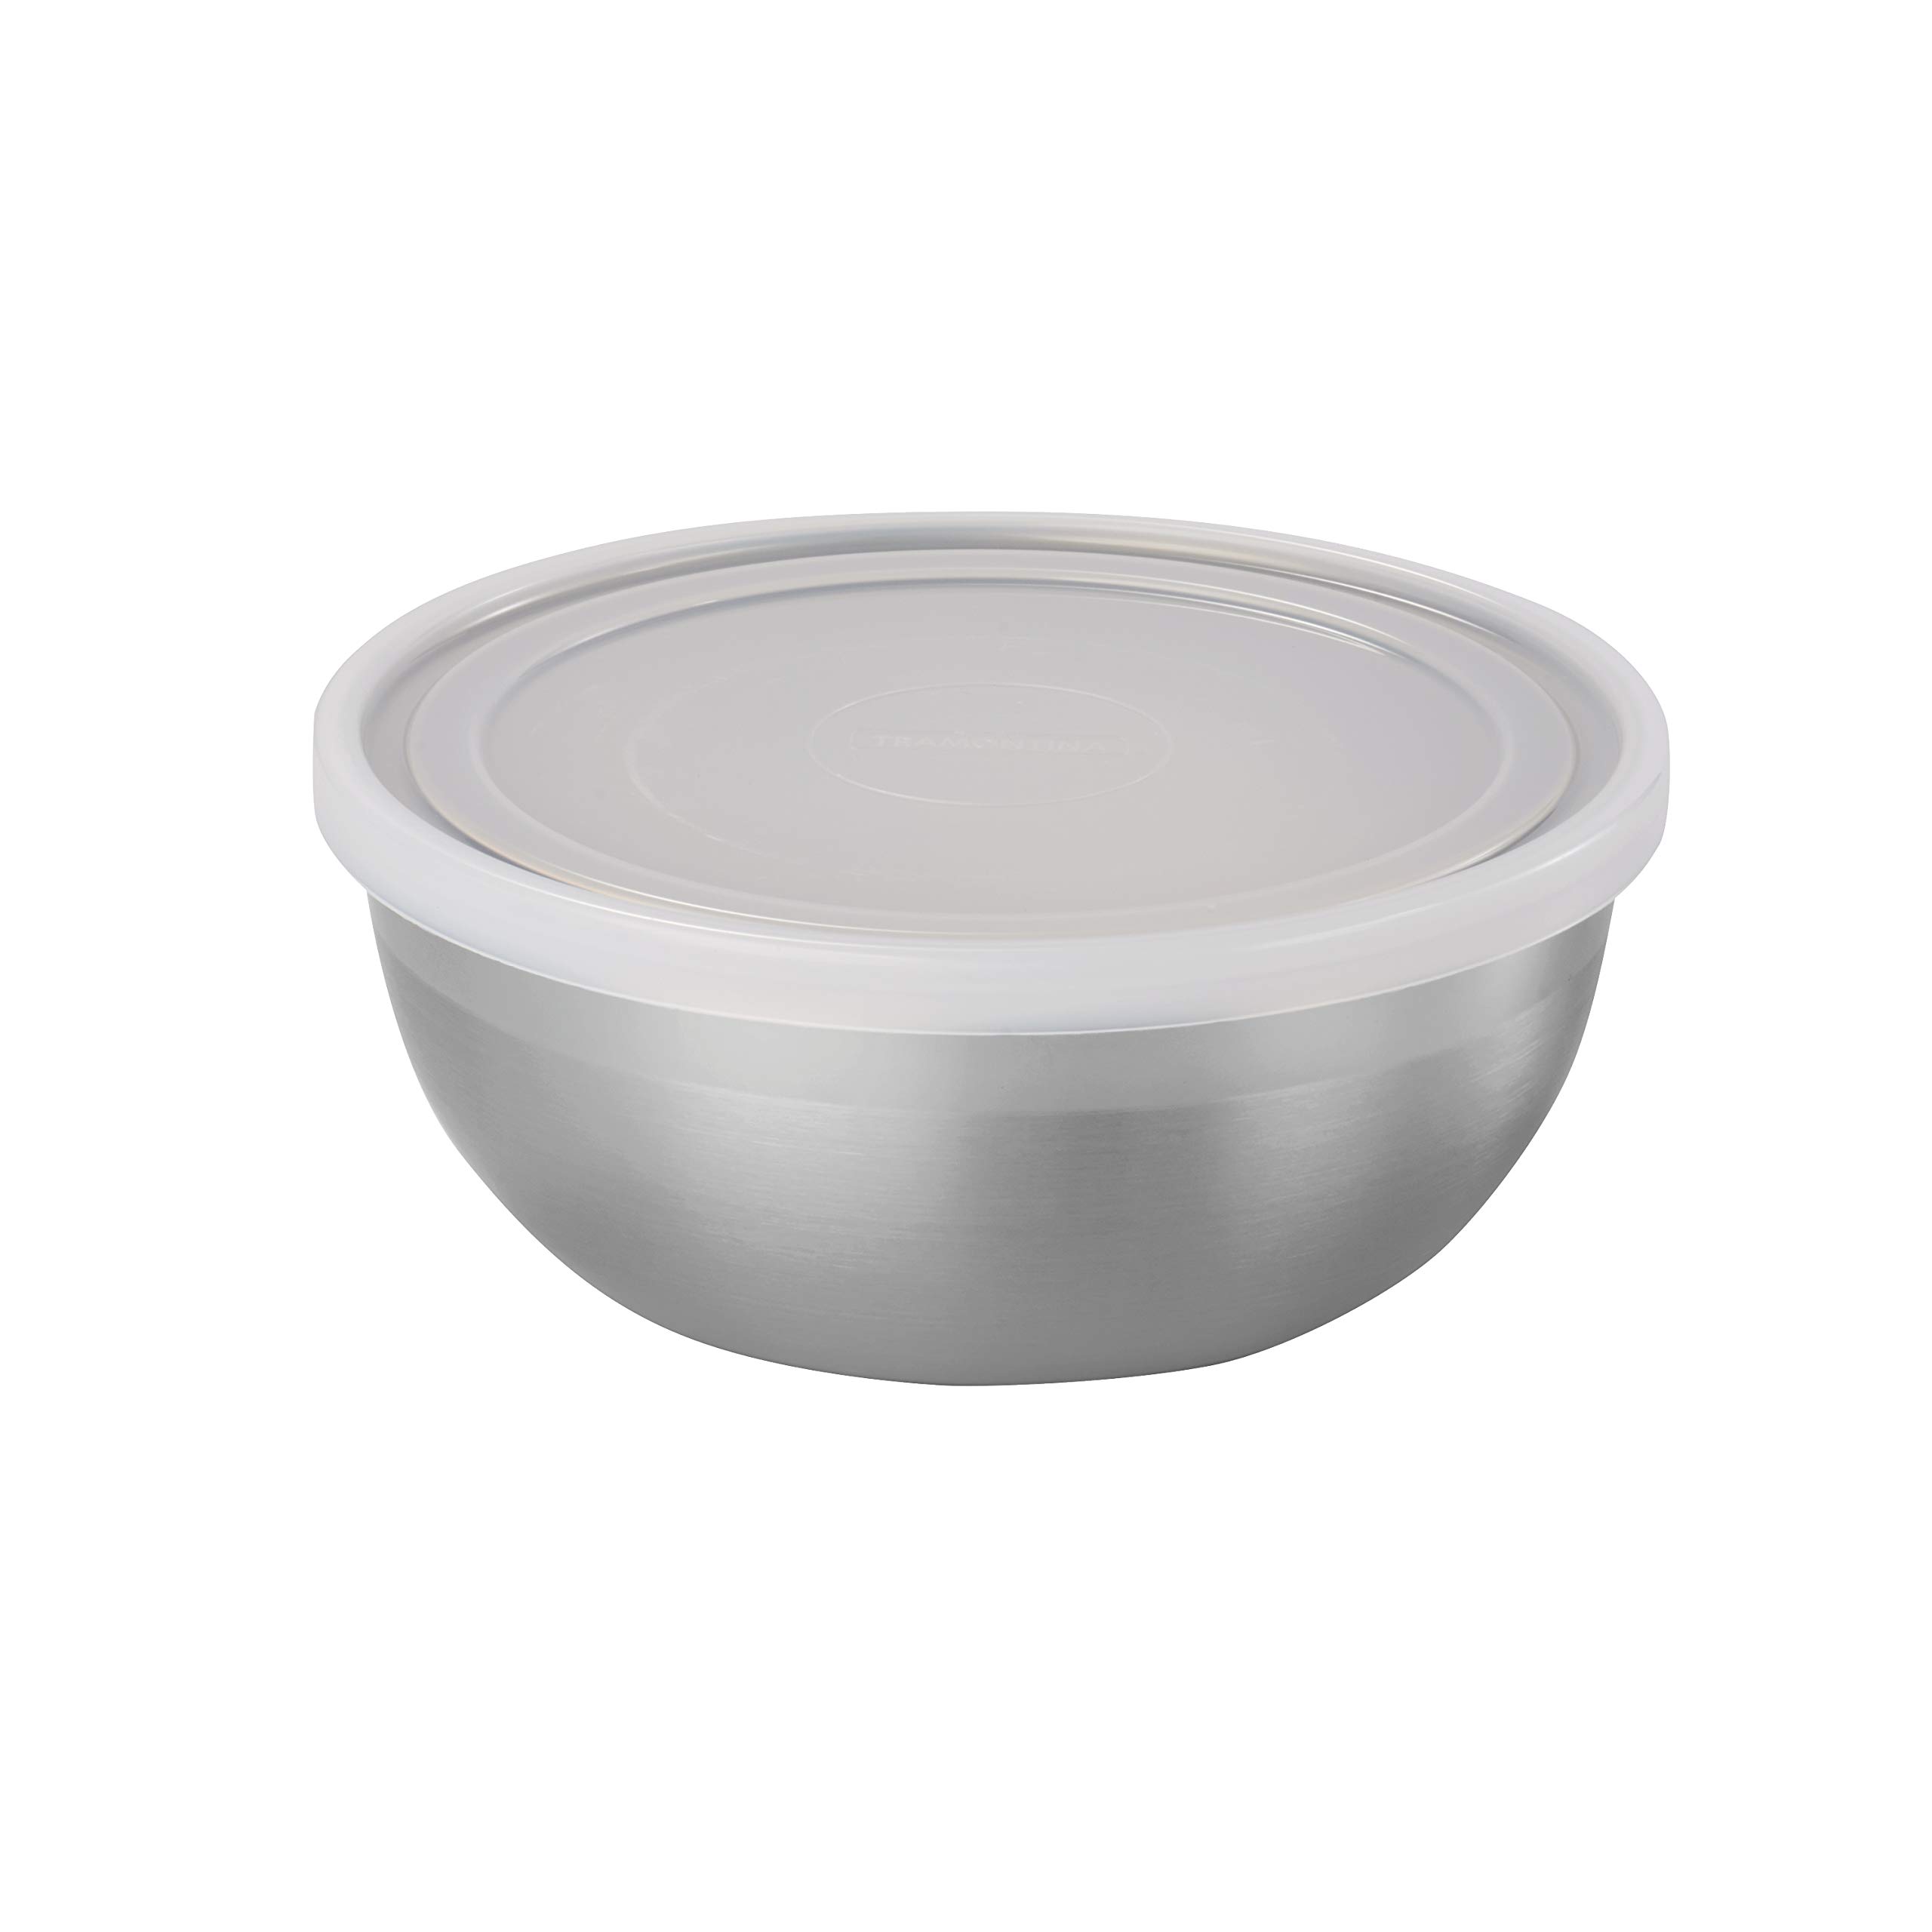 Tramontina Covered Round Container Set w/Frosted Lids Stainless Steel 3 Pc, 80204/020DS